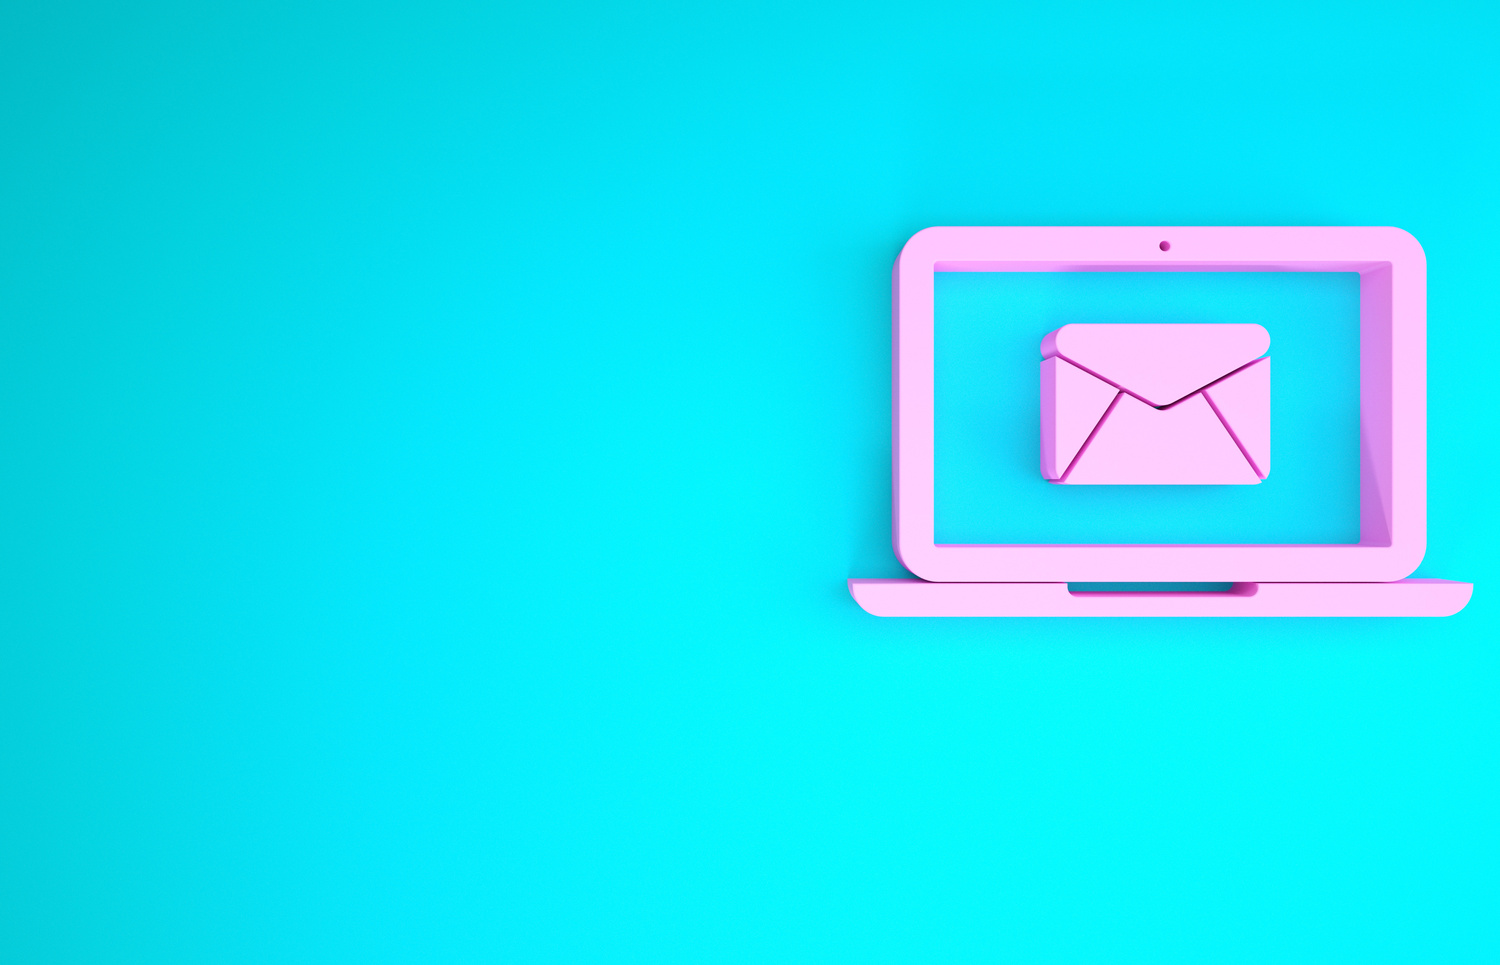 Pink Laptop with Envelope and Open Email on Screen Icon Isolated on Blue Background. Email Marketing, Internet Advertising Concepts. Minimalism Concept. 3D Illustration 3D Render